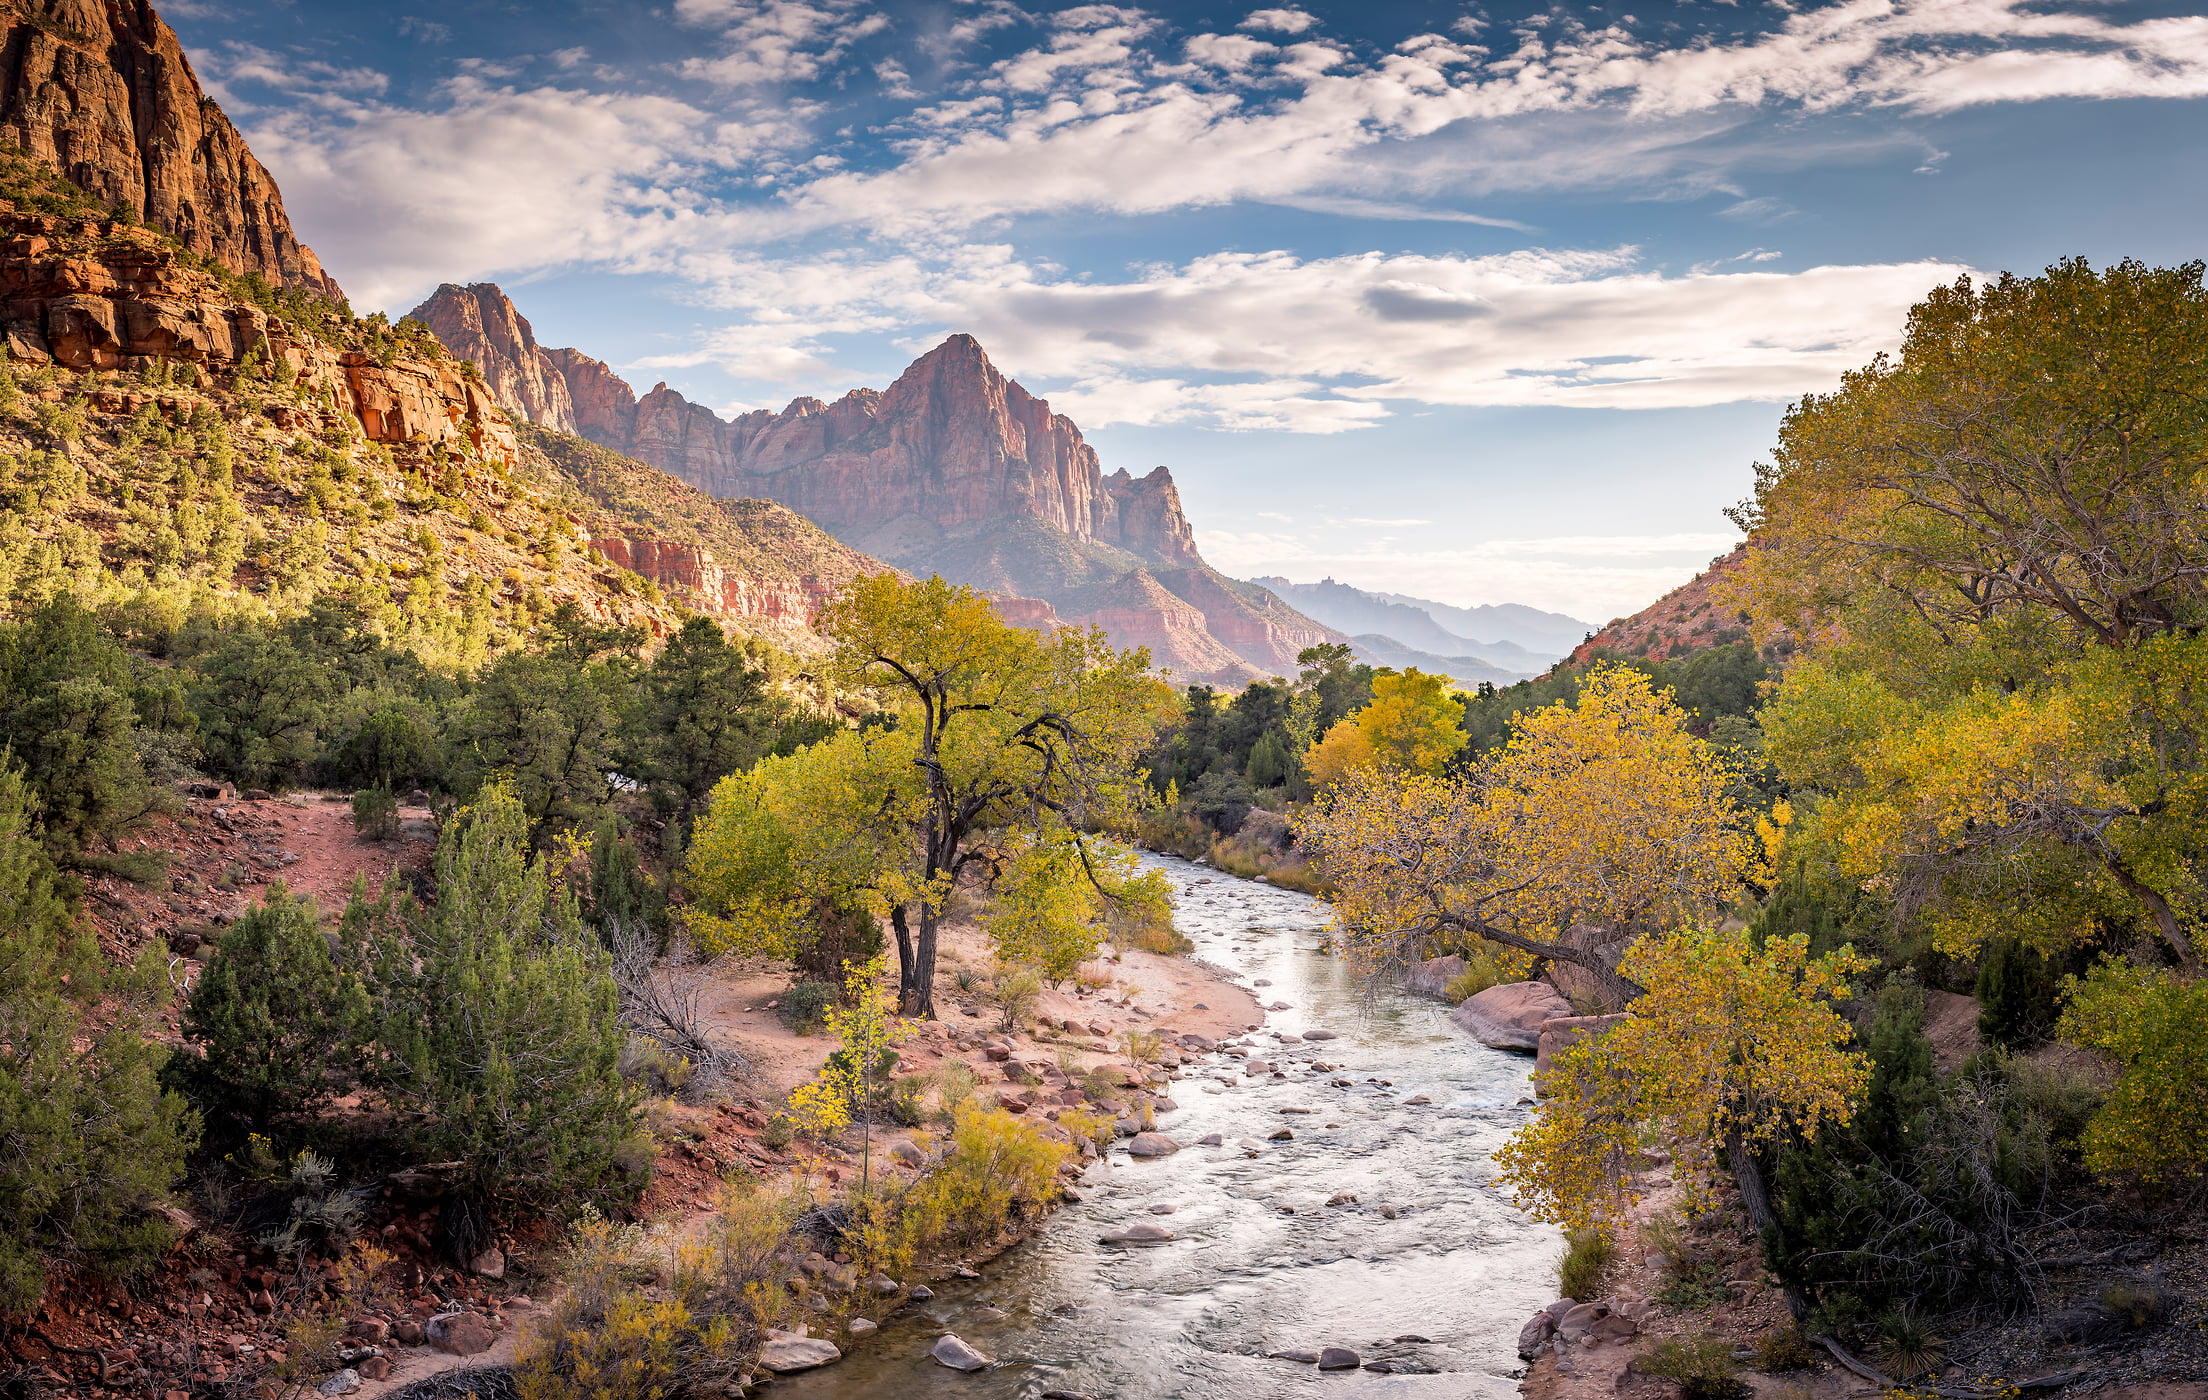 302 megapixels! A very high resolution, large-format VAST photo print of a beautiful American landscape scene with a stream and autumn trees in Zion National Park; landscape photo of a valley in Utah created by Justin Katz